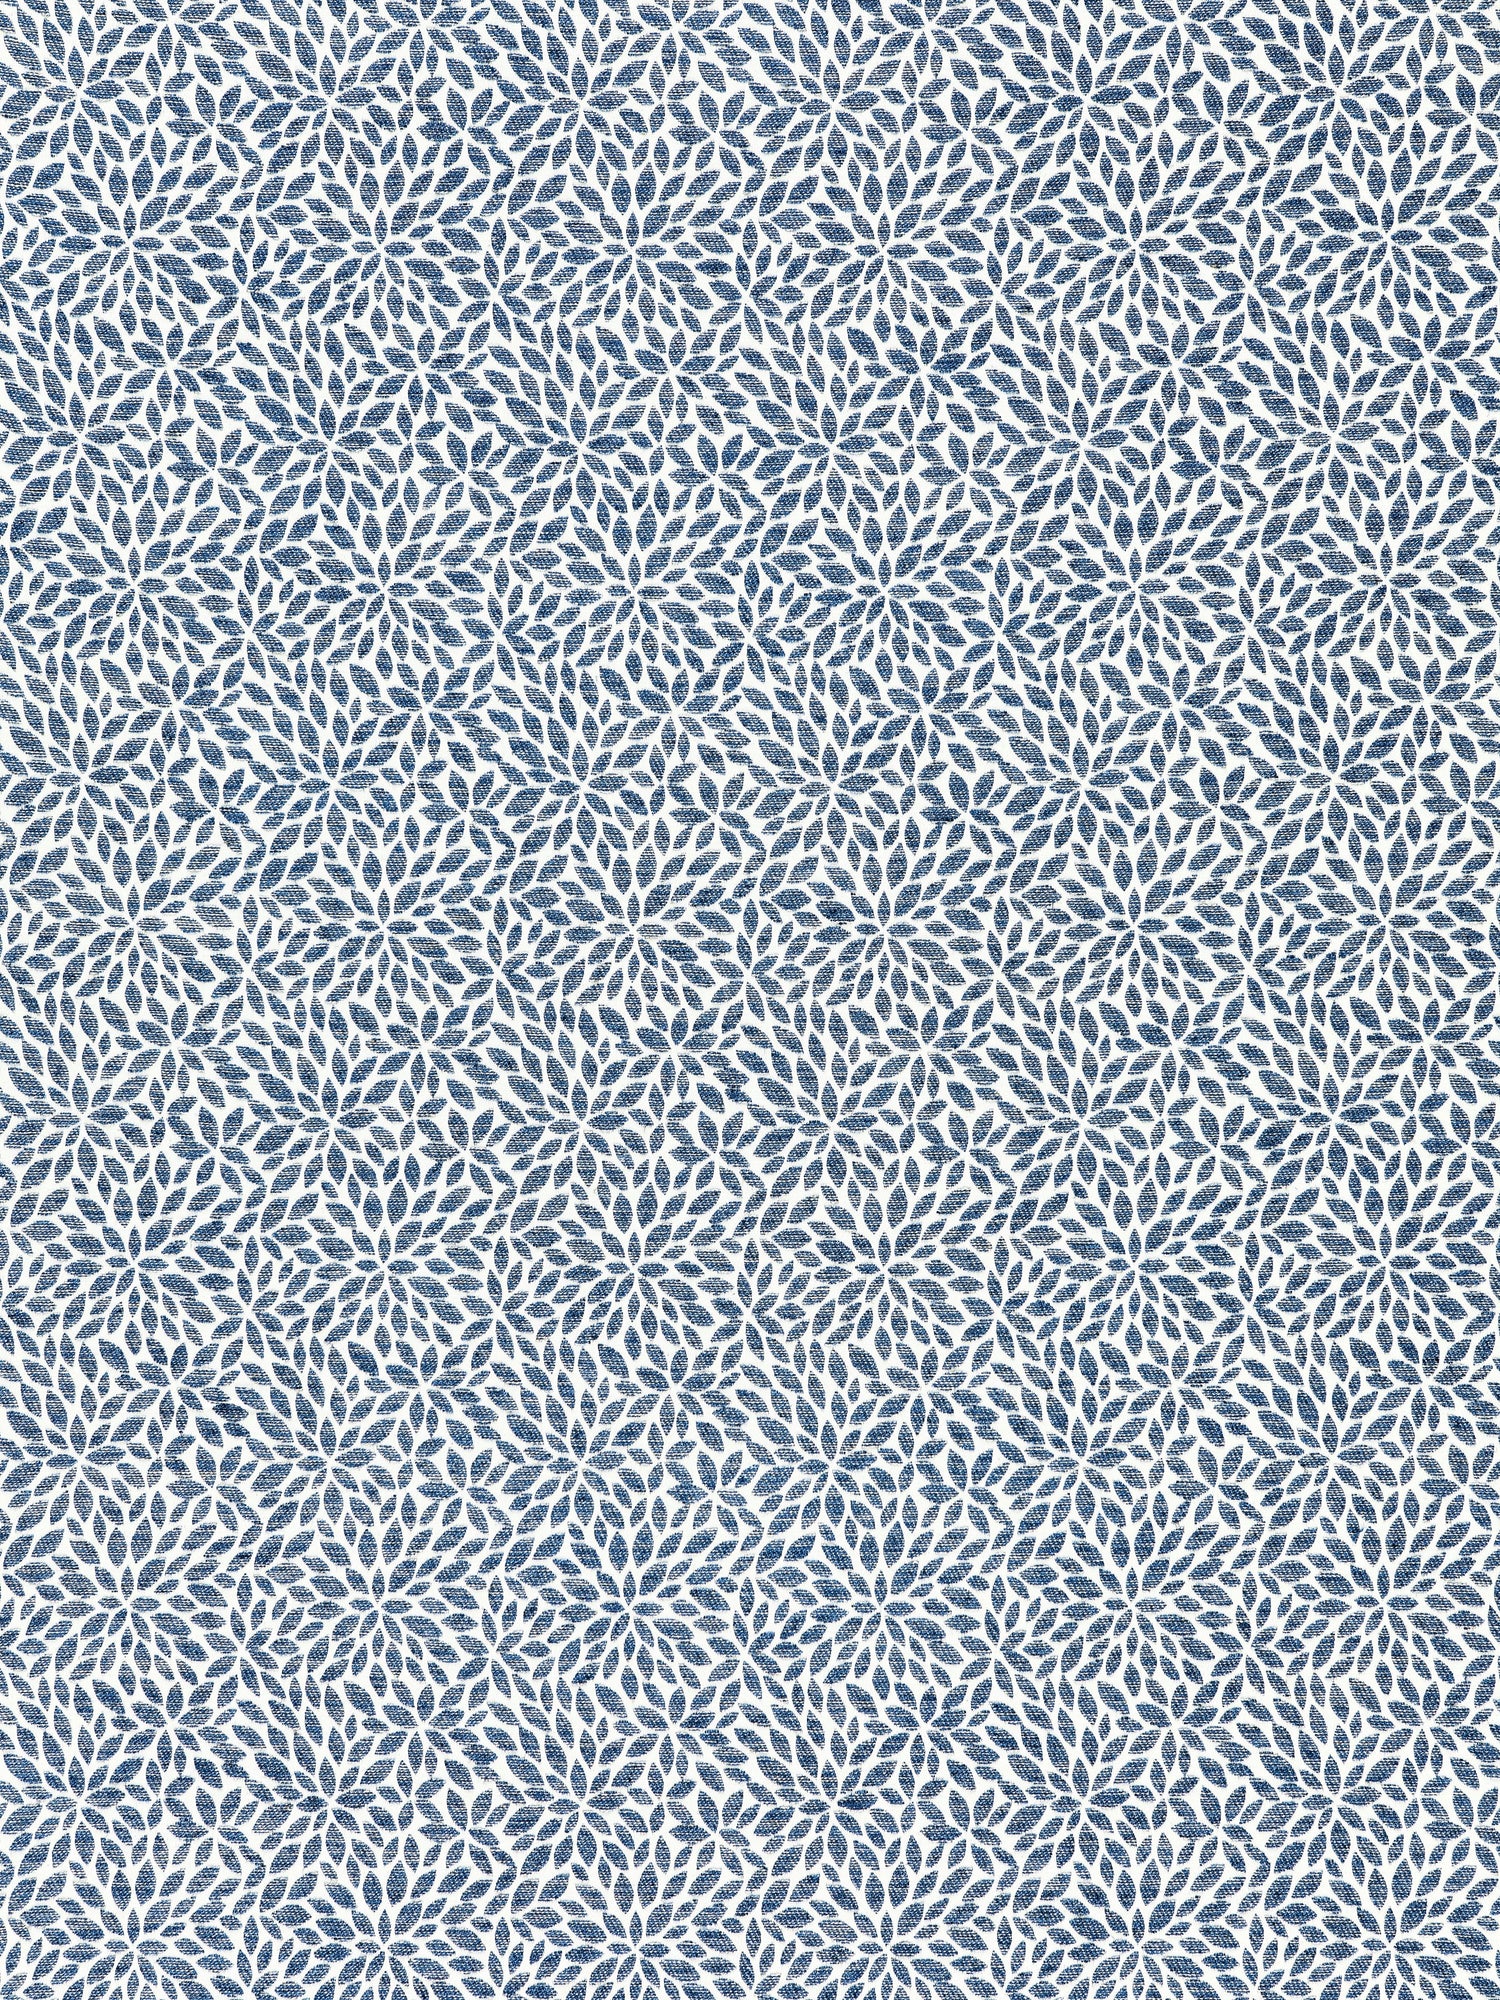 Risa Weave fabric in blue jay color - pattern number SC 000327239 - by Scalamandre in the Scalamandre Fabrics Book 1 collection